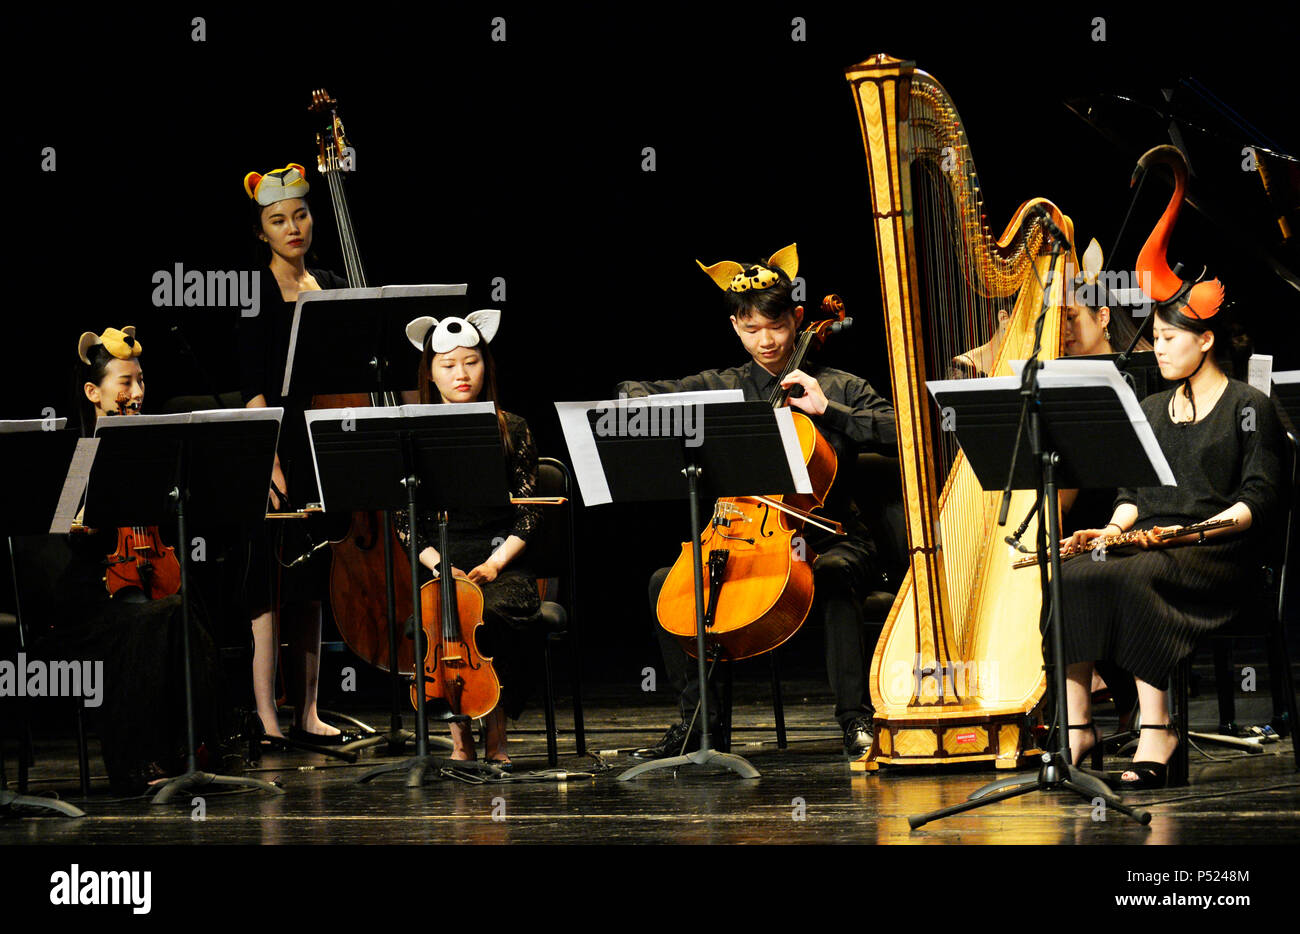 Tianjin. 23rd June, 2018. Members of a symphony orchestra stage an animal-themed concert for children and parents at Tianjin Grand Theatre in north China's Tianjin, June 23, 2018. Credit: Shi Songyu/Xinhua/Alamy Live News Stock Photo